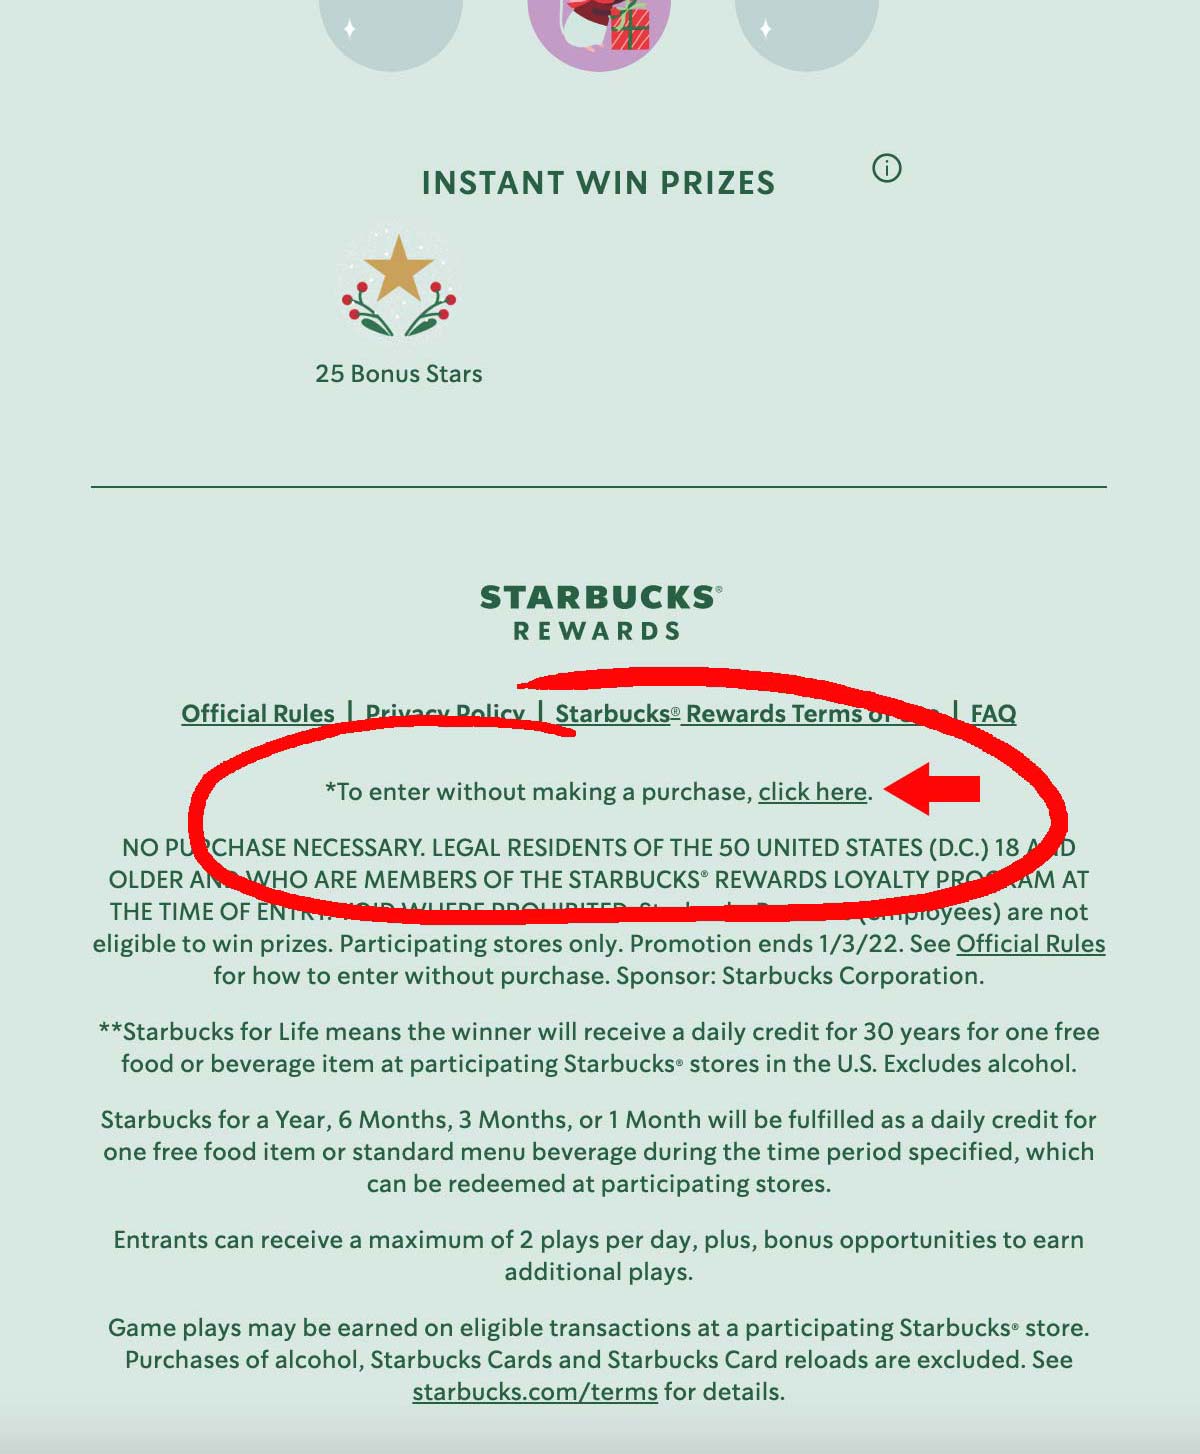 Starbucks for Life game with highlight to show where to get free game plays.